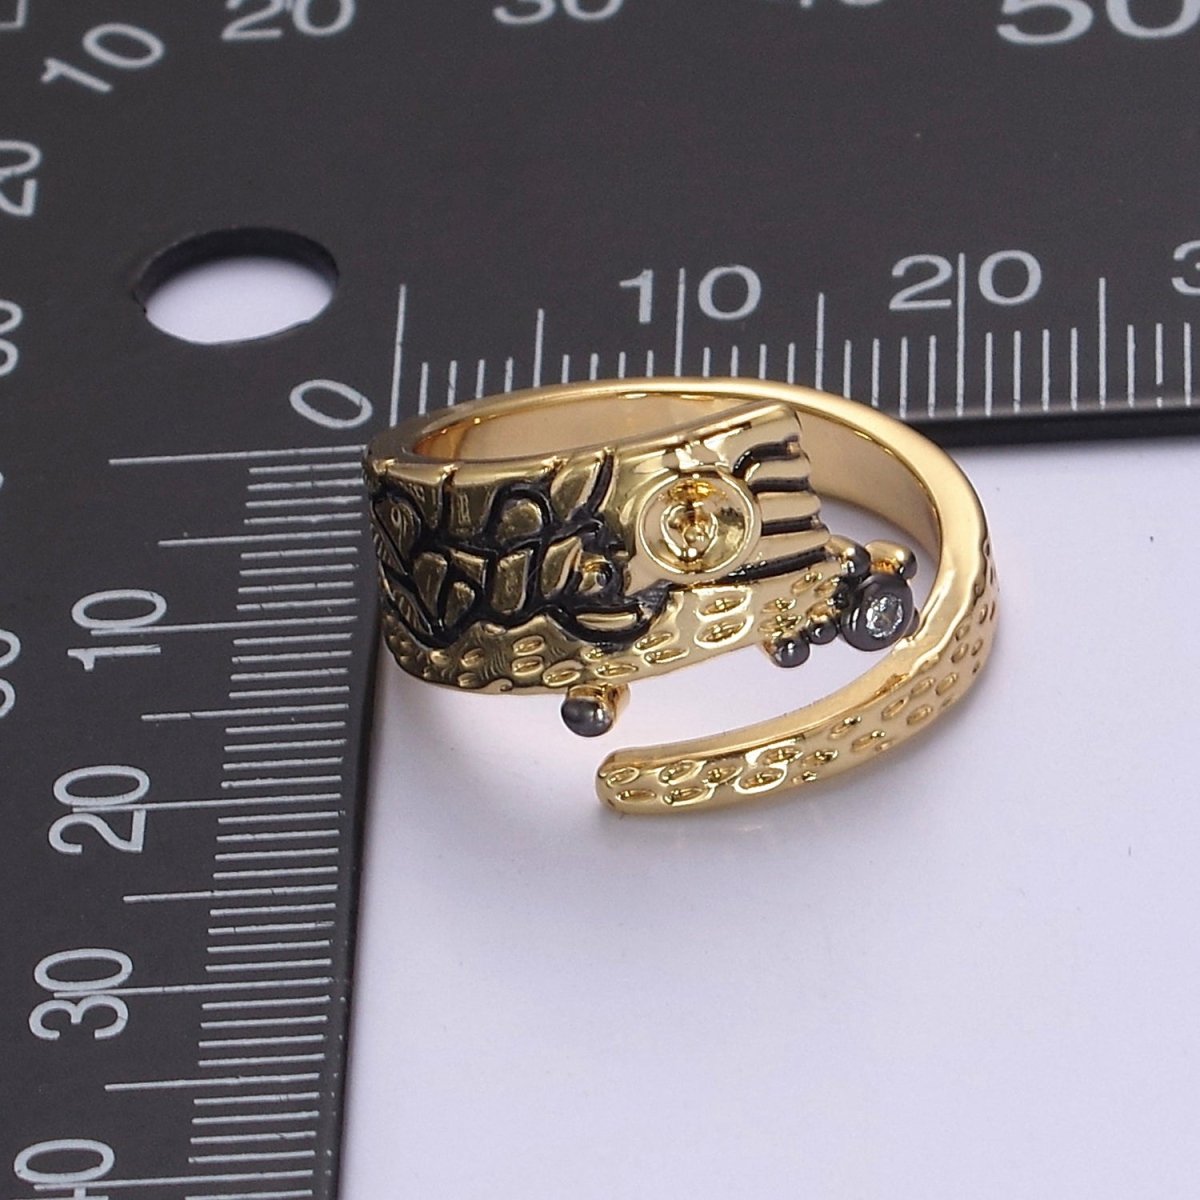 Irregular Gold Ring, Thick Band Gold Ring, Abstract Ring, Unique Design Ring Black Streetwear Cool Fashion Ring S-466 - DLUXCA